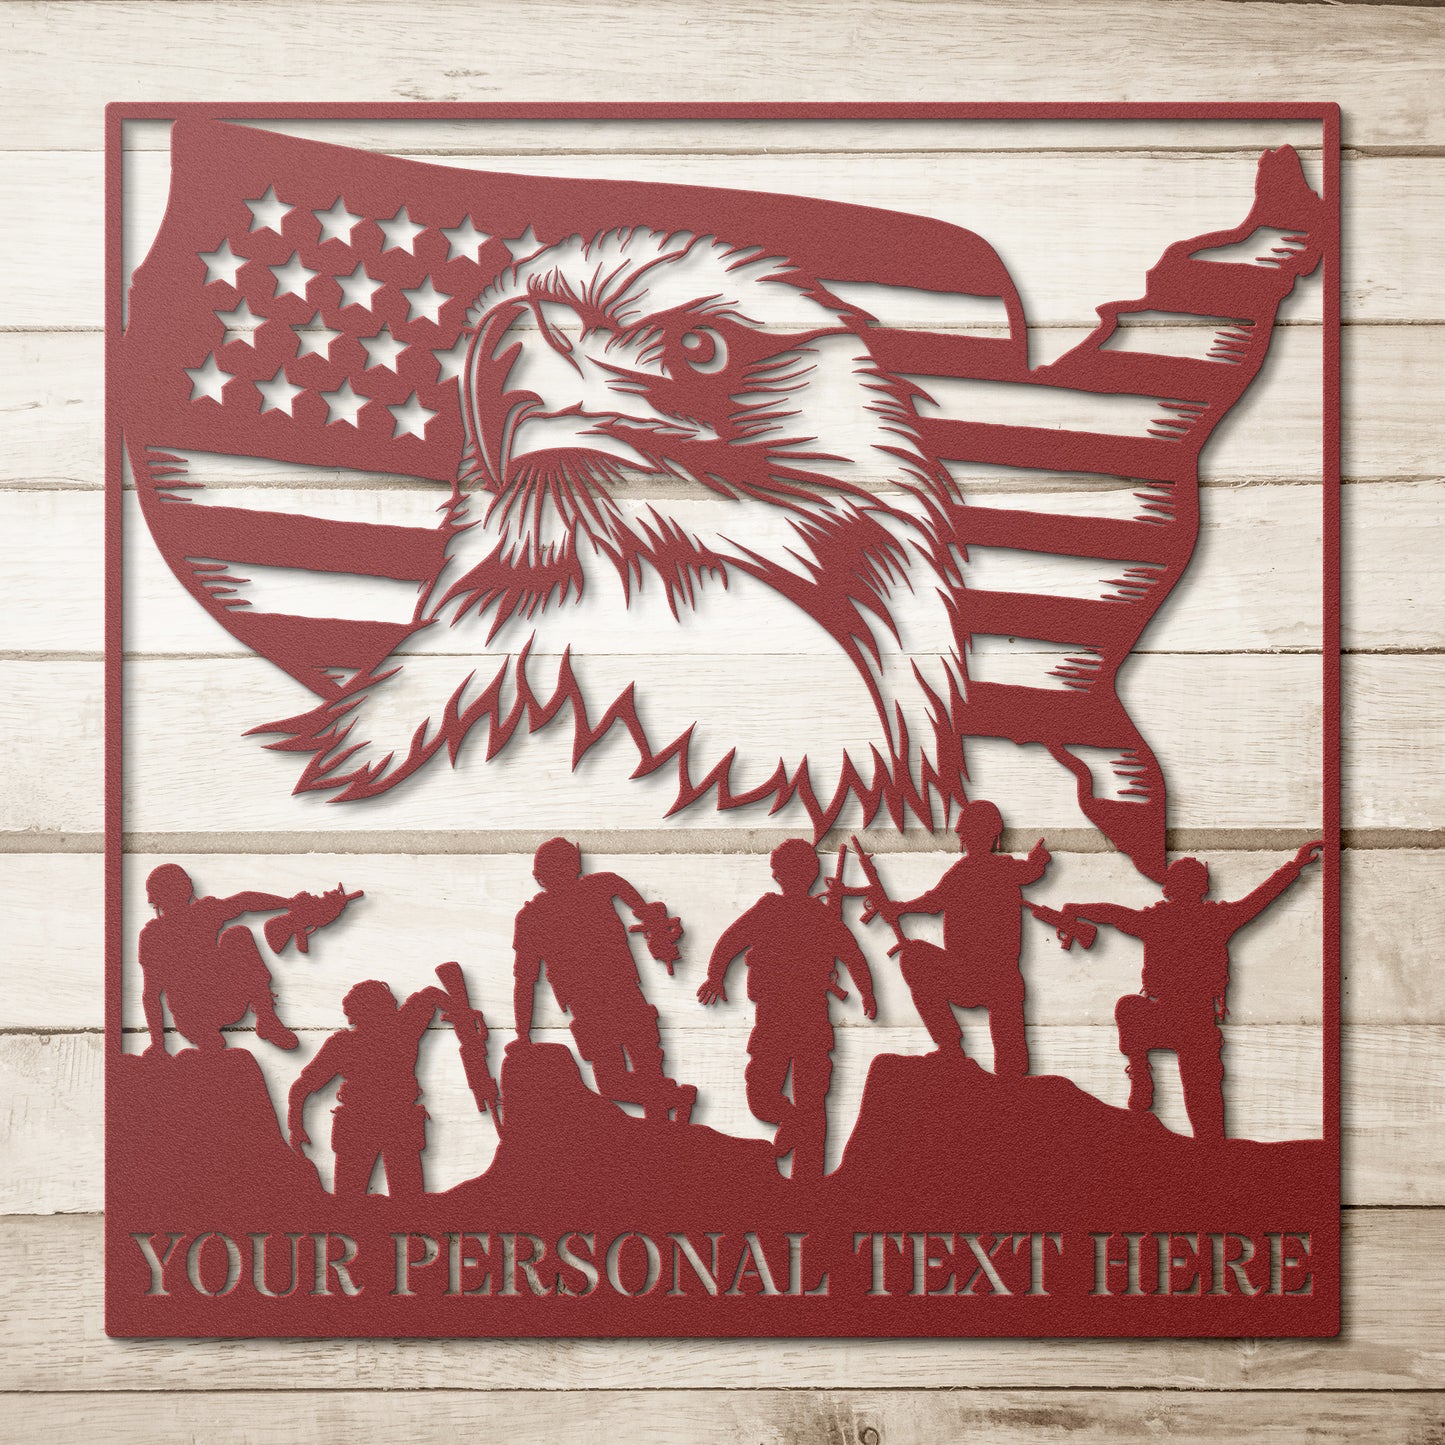 Personalized Military Team Metal Sign Gift. US Veteran Monogram. US Soldier Wall Hanging. Patriotic Eagle Wall Art. Custom Army Plaque Decor